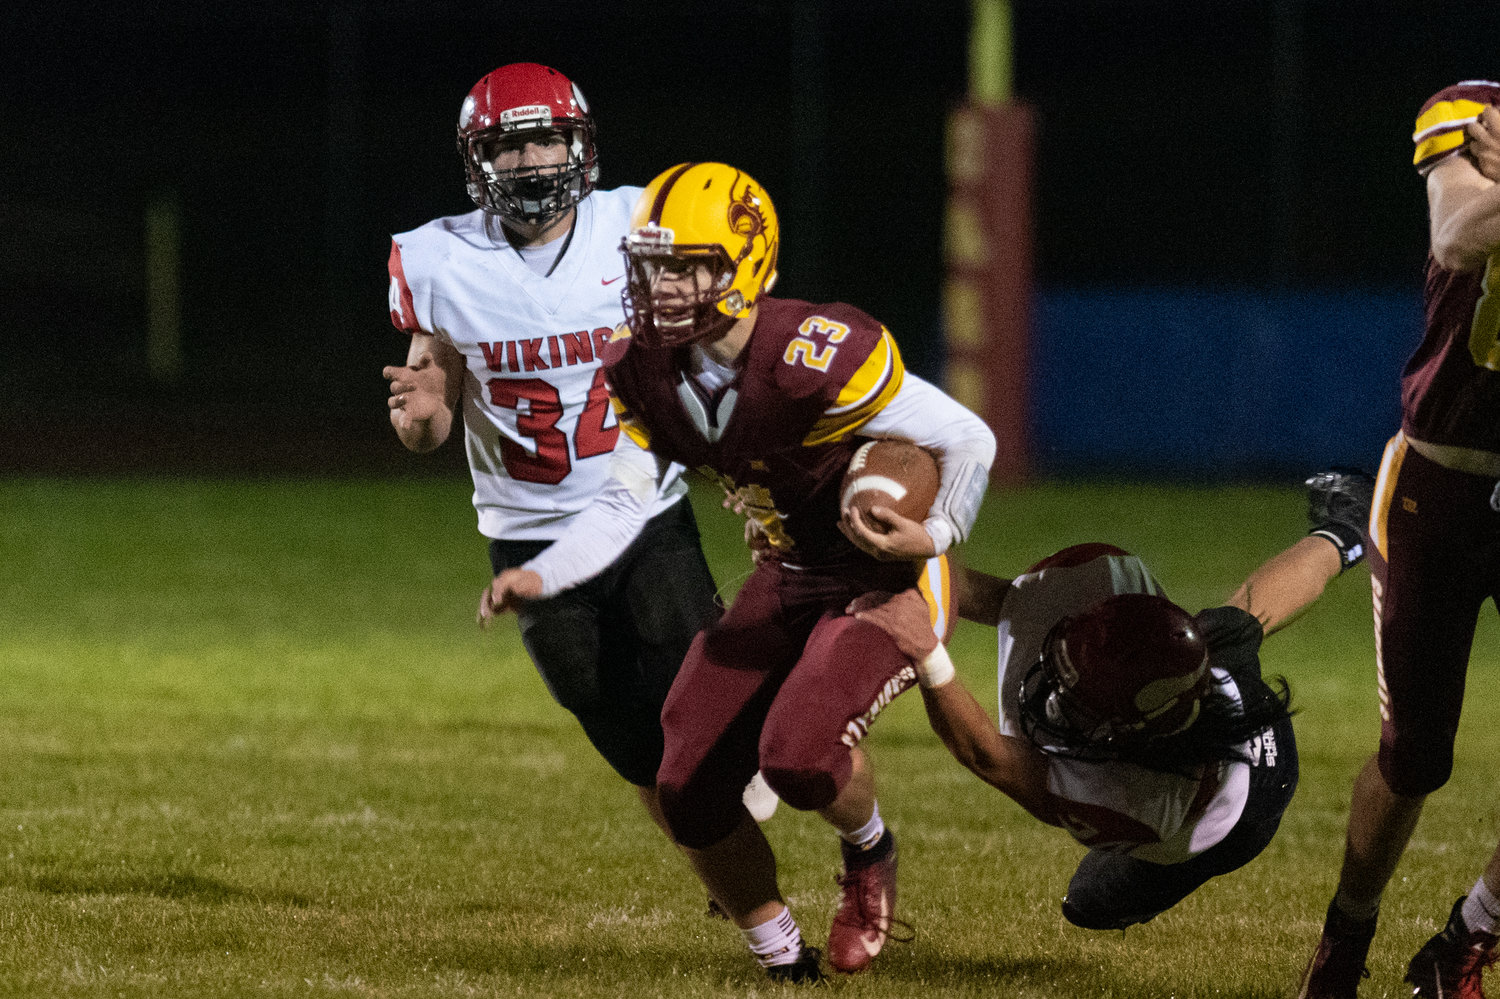 FILE PHOTO -- Winlock quarterback Neal Patching breaks a tackle in the Cardinals win over Mossyrock Oct. 8.